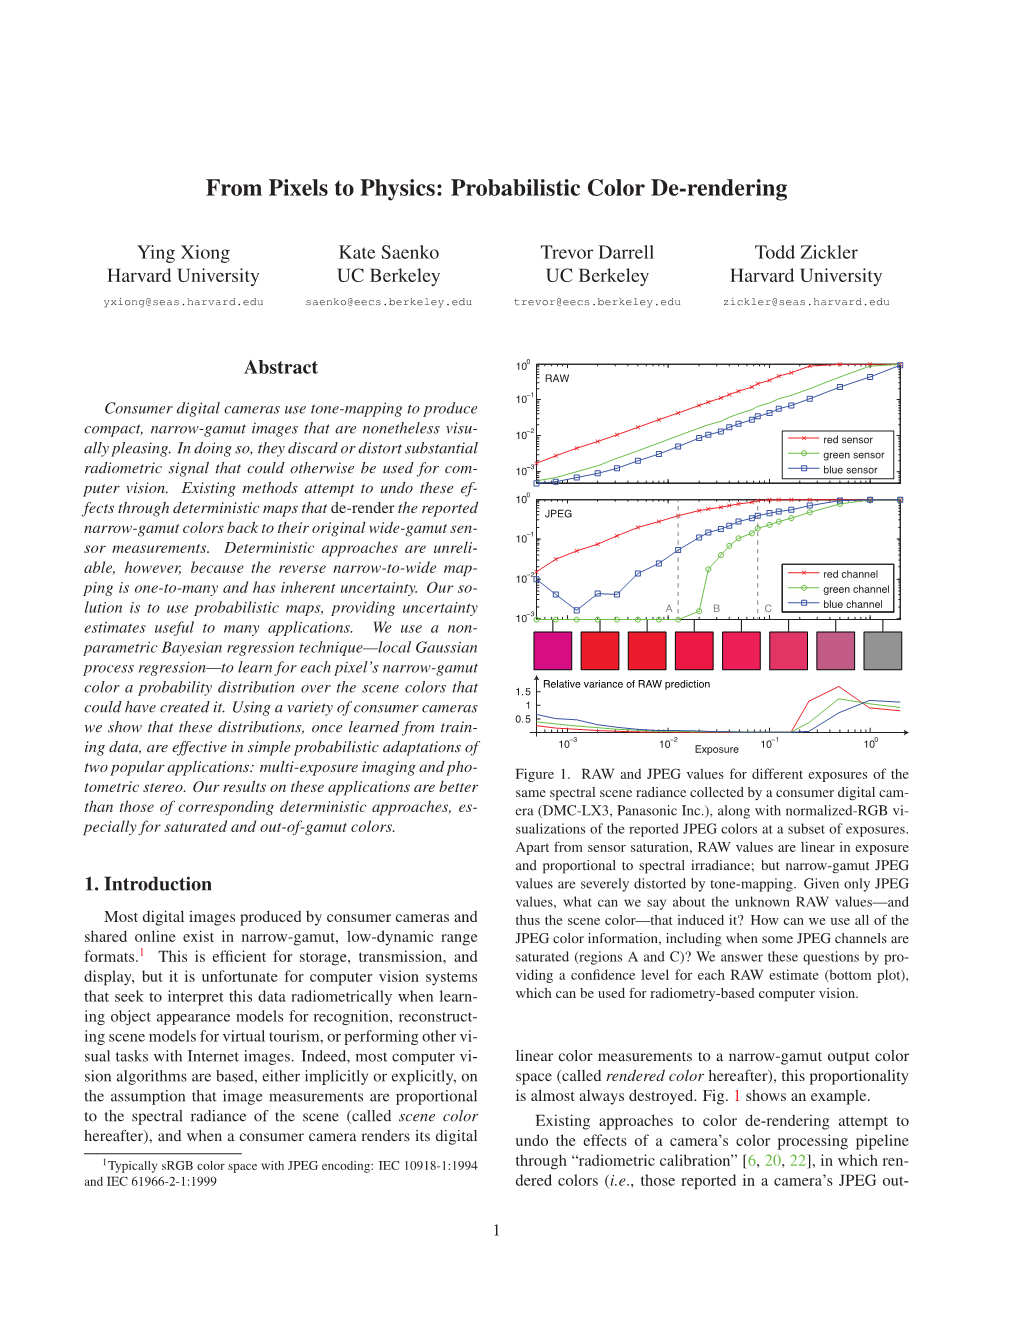 From Pixels to Physics: Probabilistic Color De-Rendering